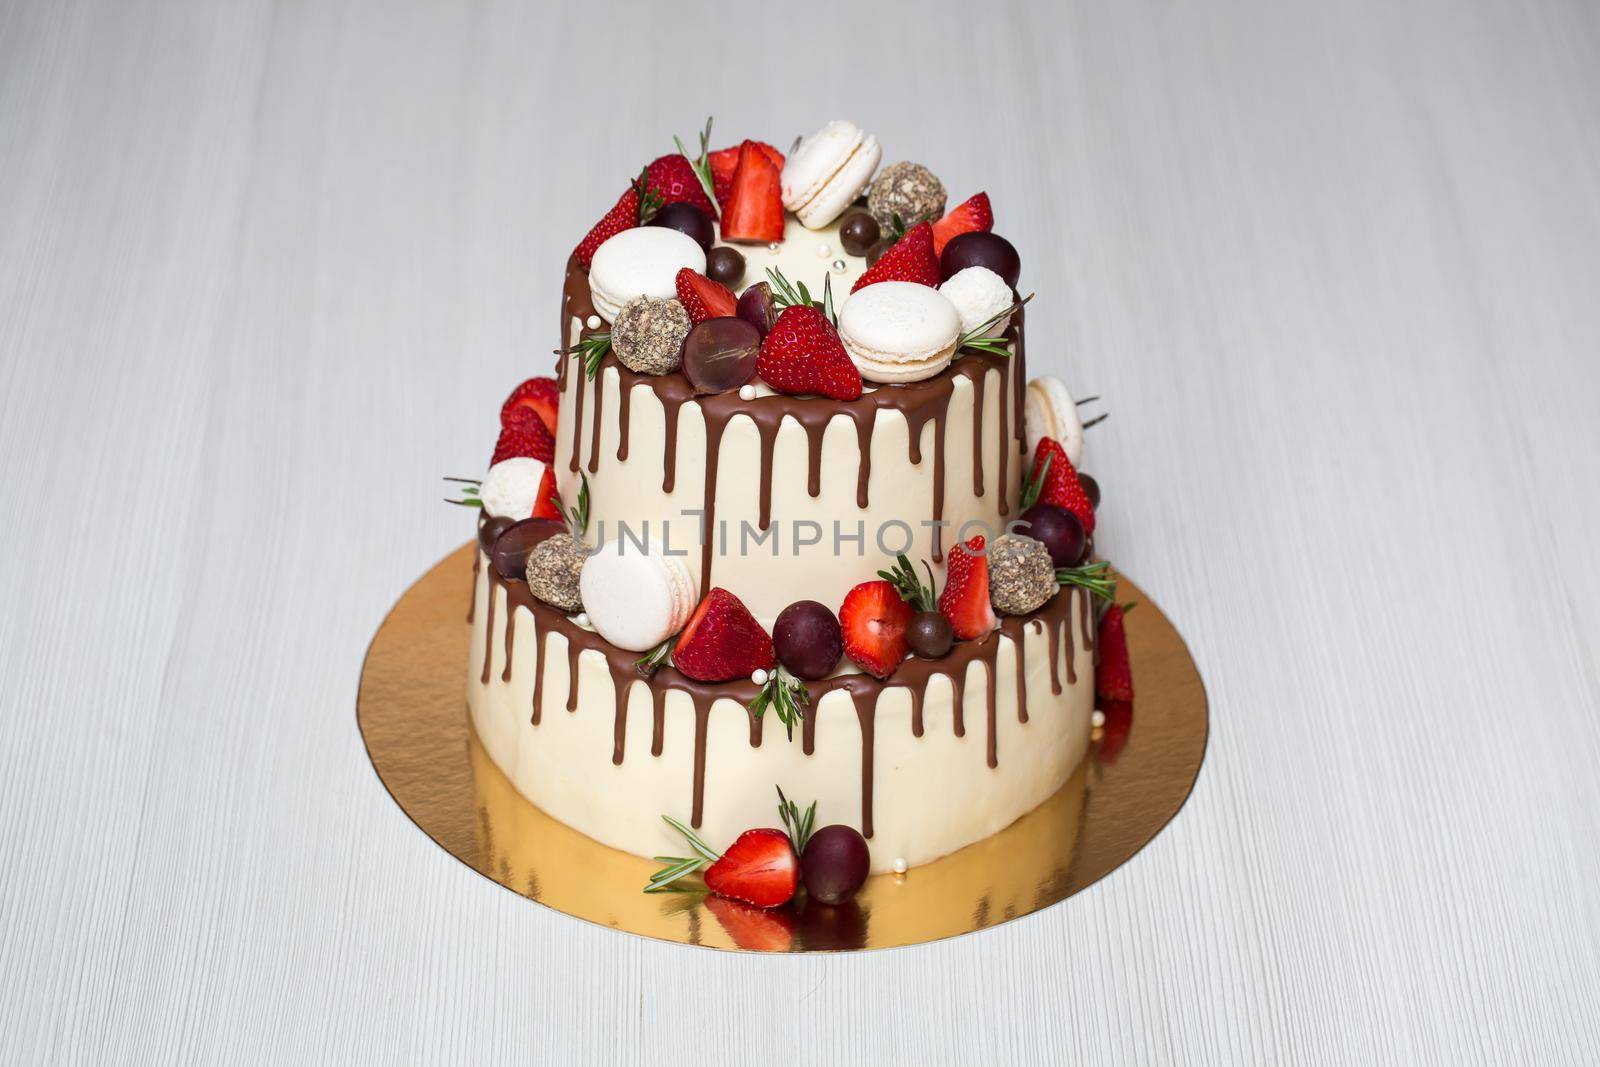 A bright cake with strawberries and chocolate streaks.